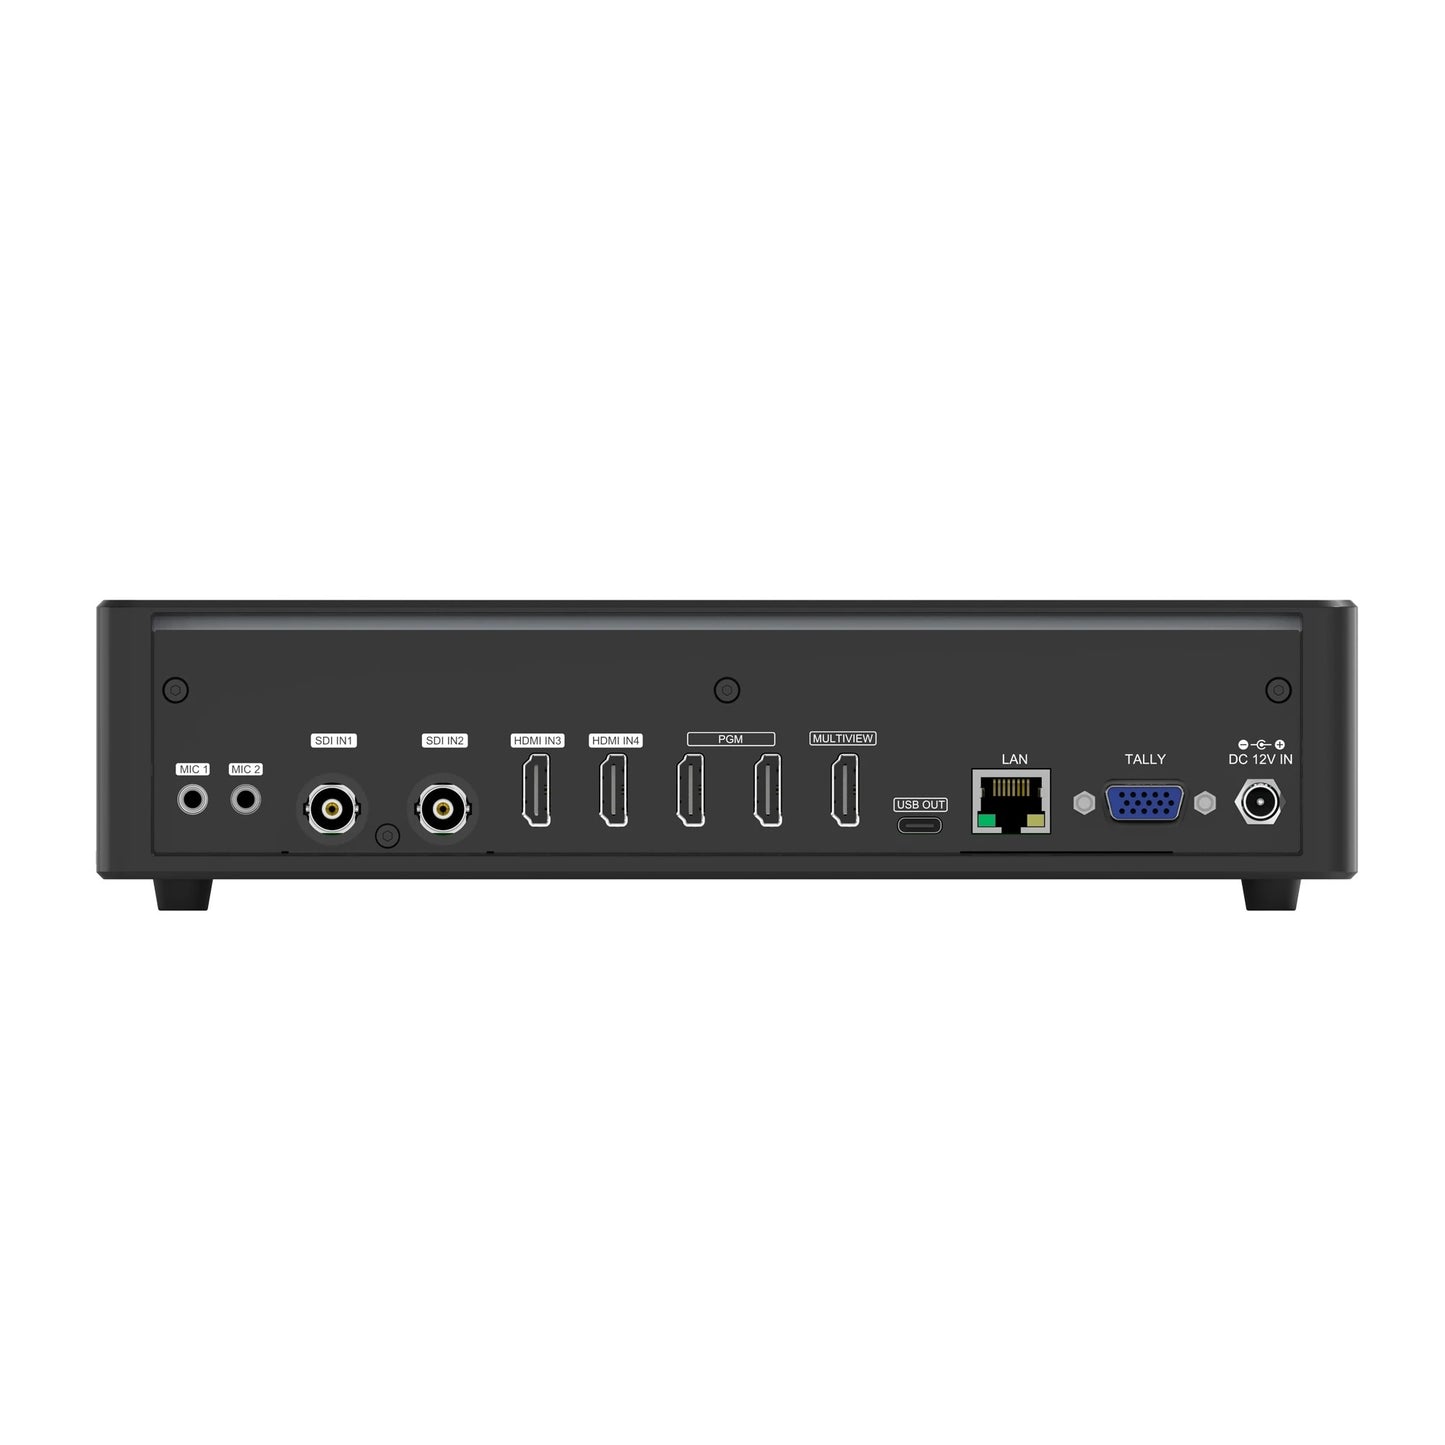 AVMatrix PVS0403U 4-Channel SDI & HDMI Video Switcher with 10.1" Full HD Monitor, Up to 1080p60 Video I/O, T-bar, Auto, and Cut Transitions, Audio Mixing and PiP Layout, and USB Type C Output for Streaming